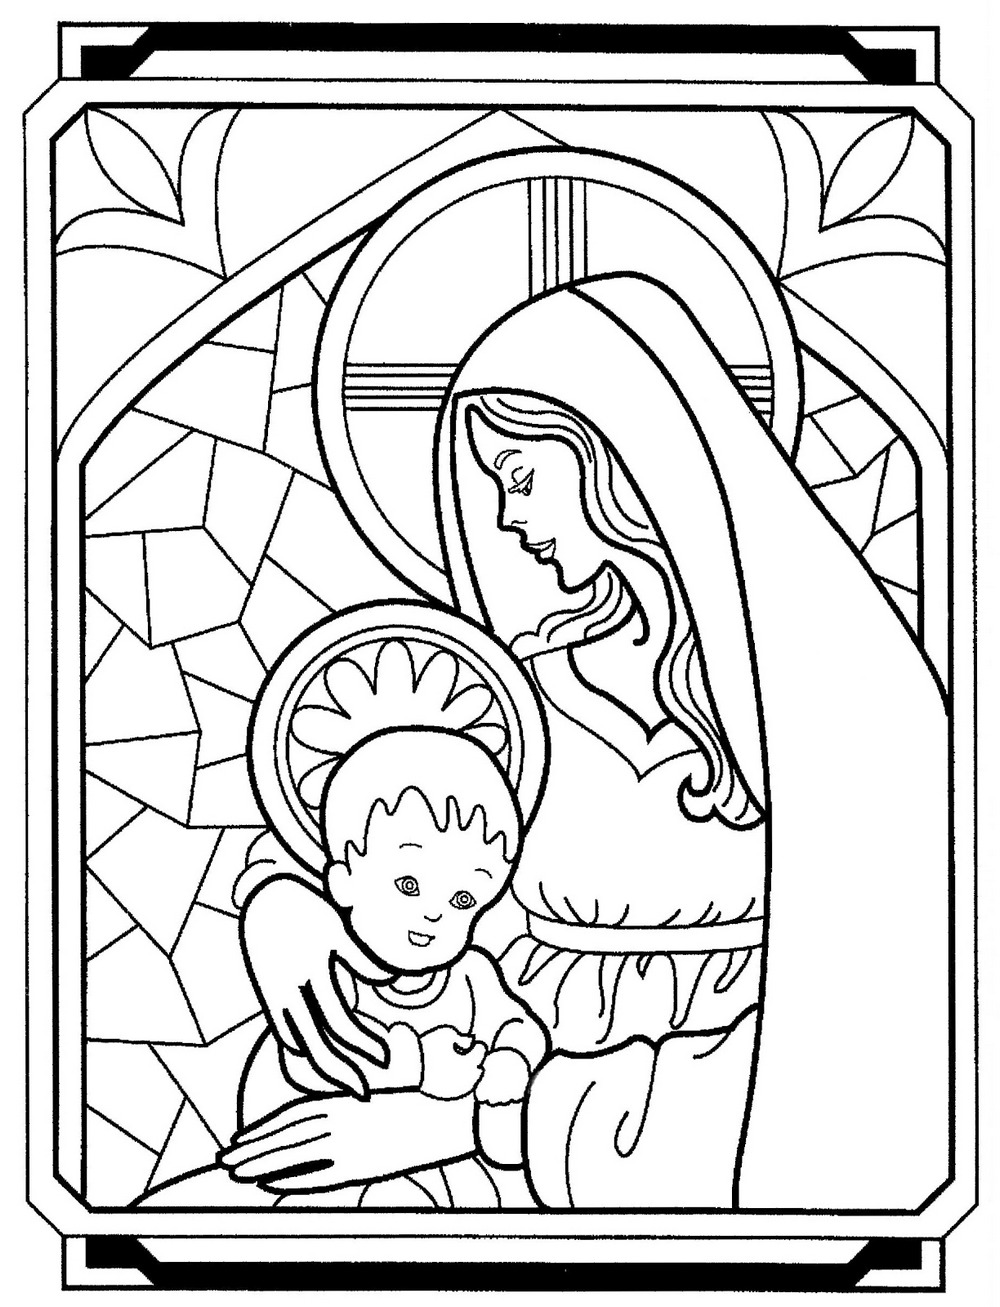 mother-mary-coloring-books